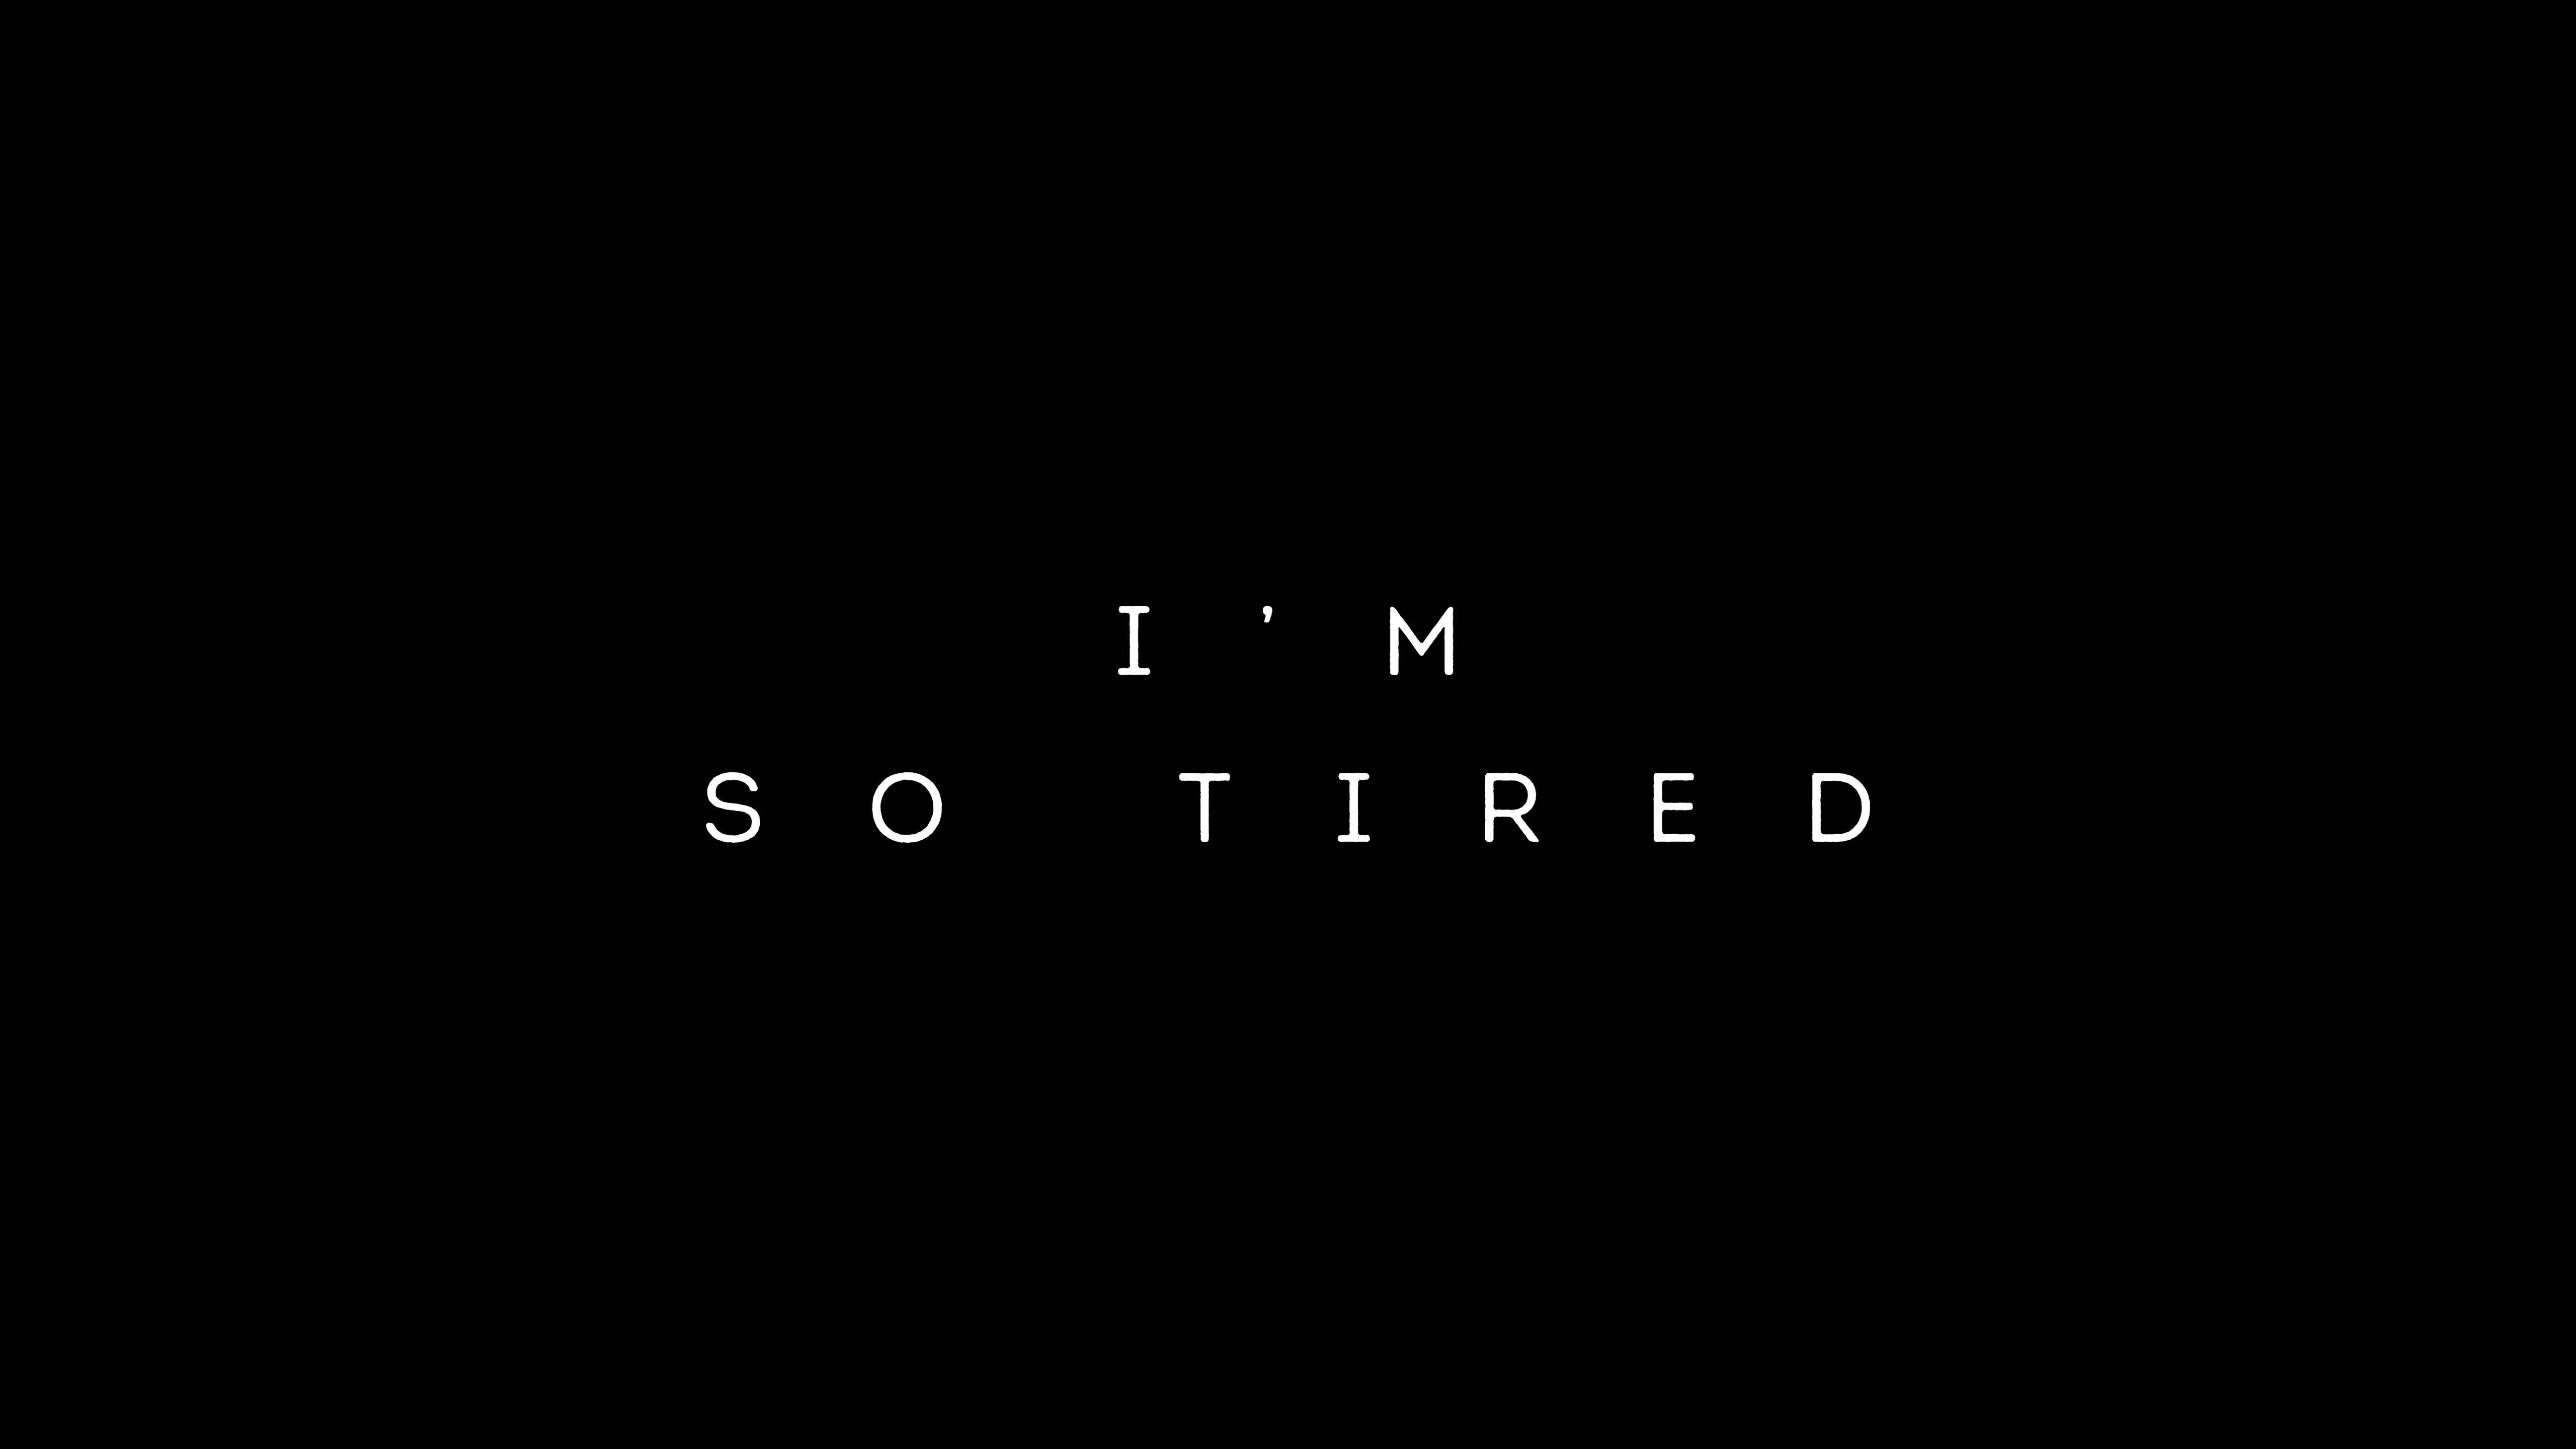 I Am So Tired  HD Typography 4k Wallpapers  Images 